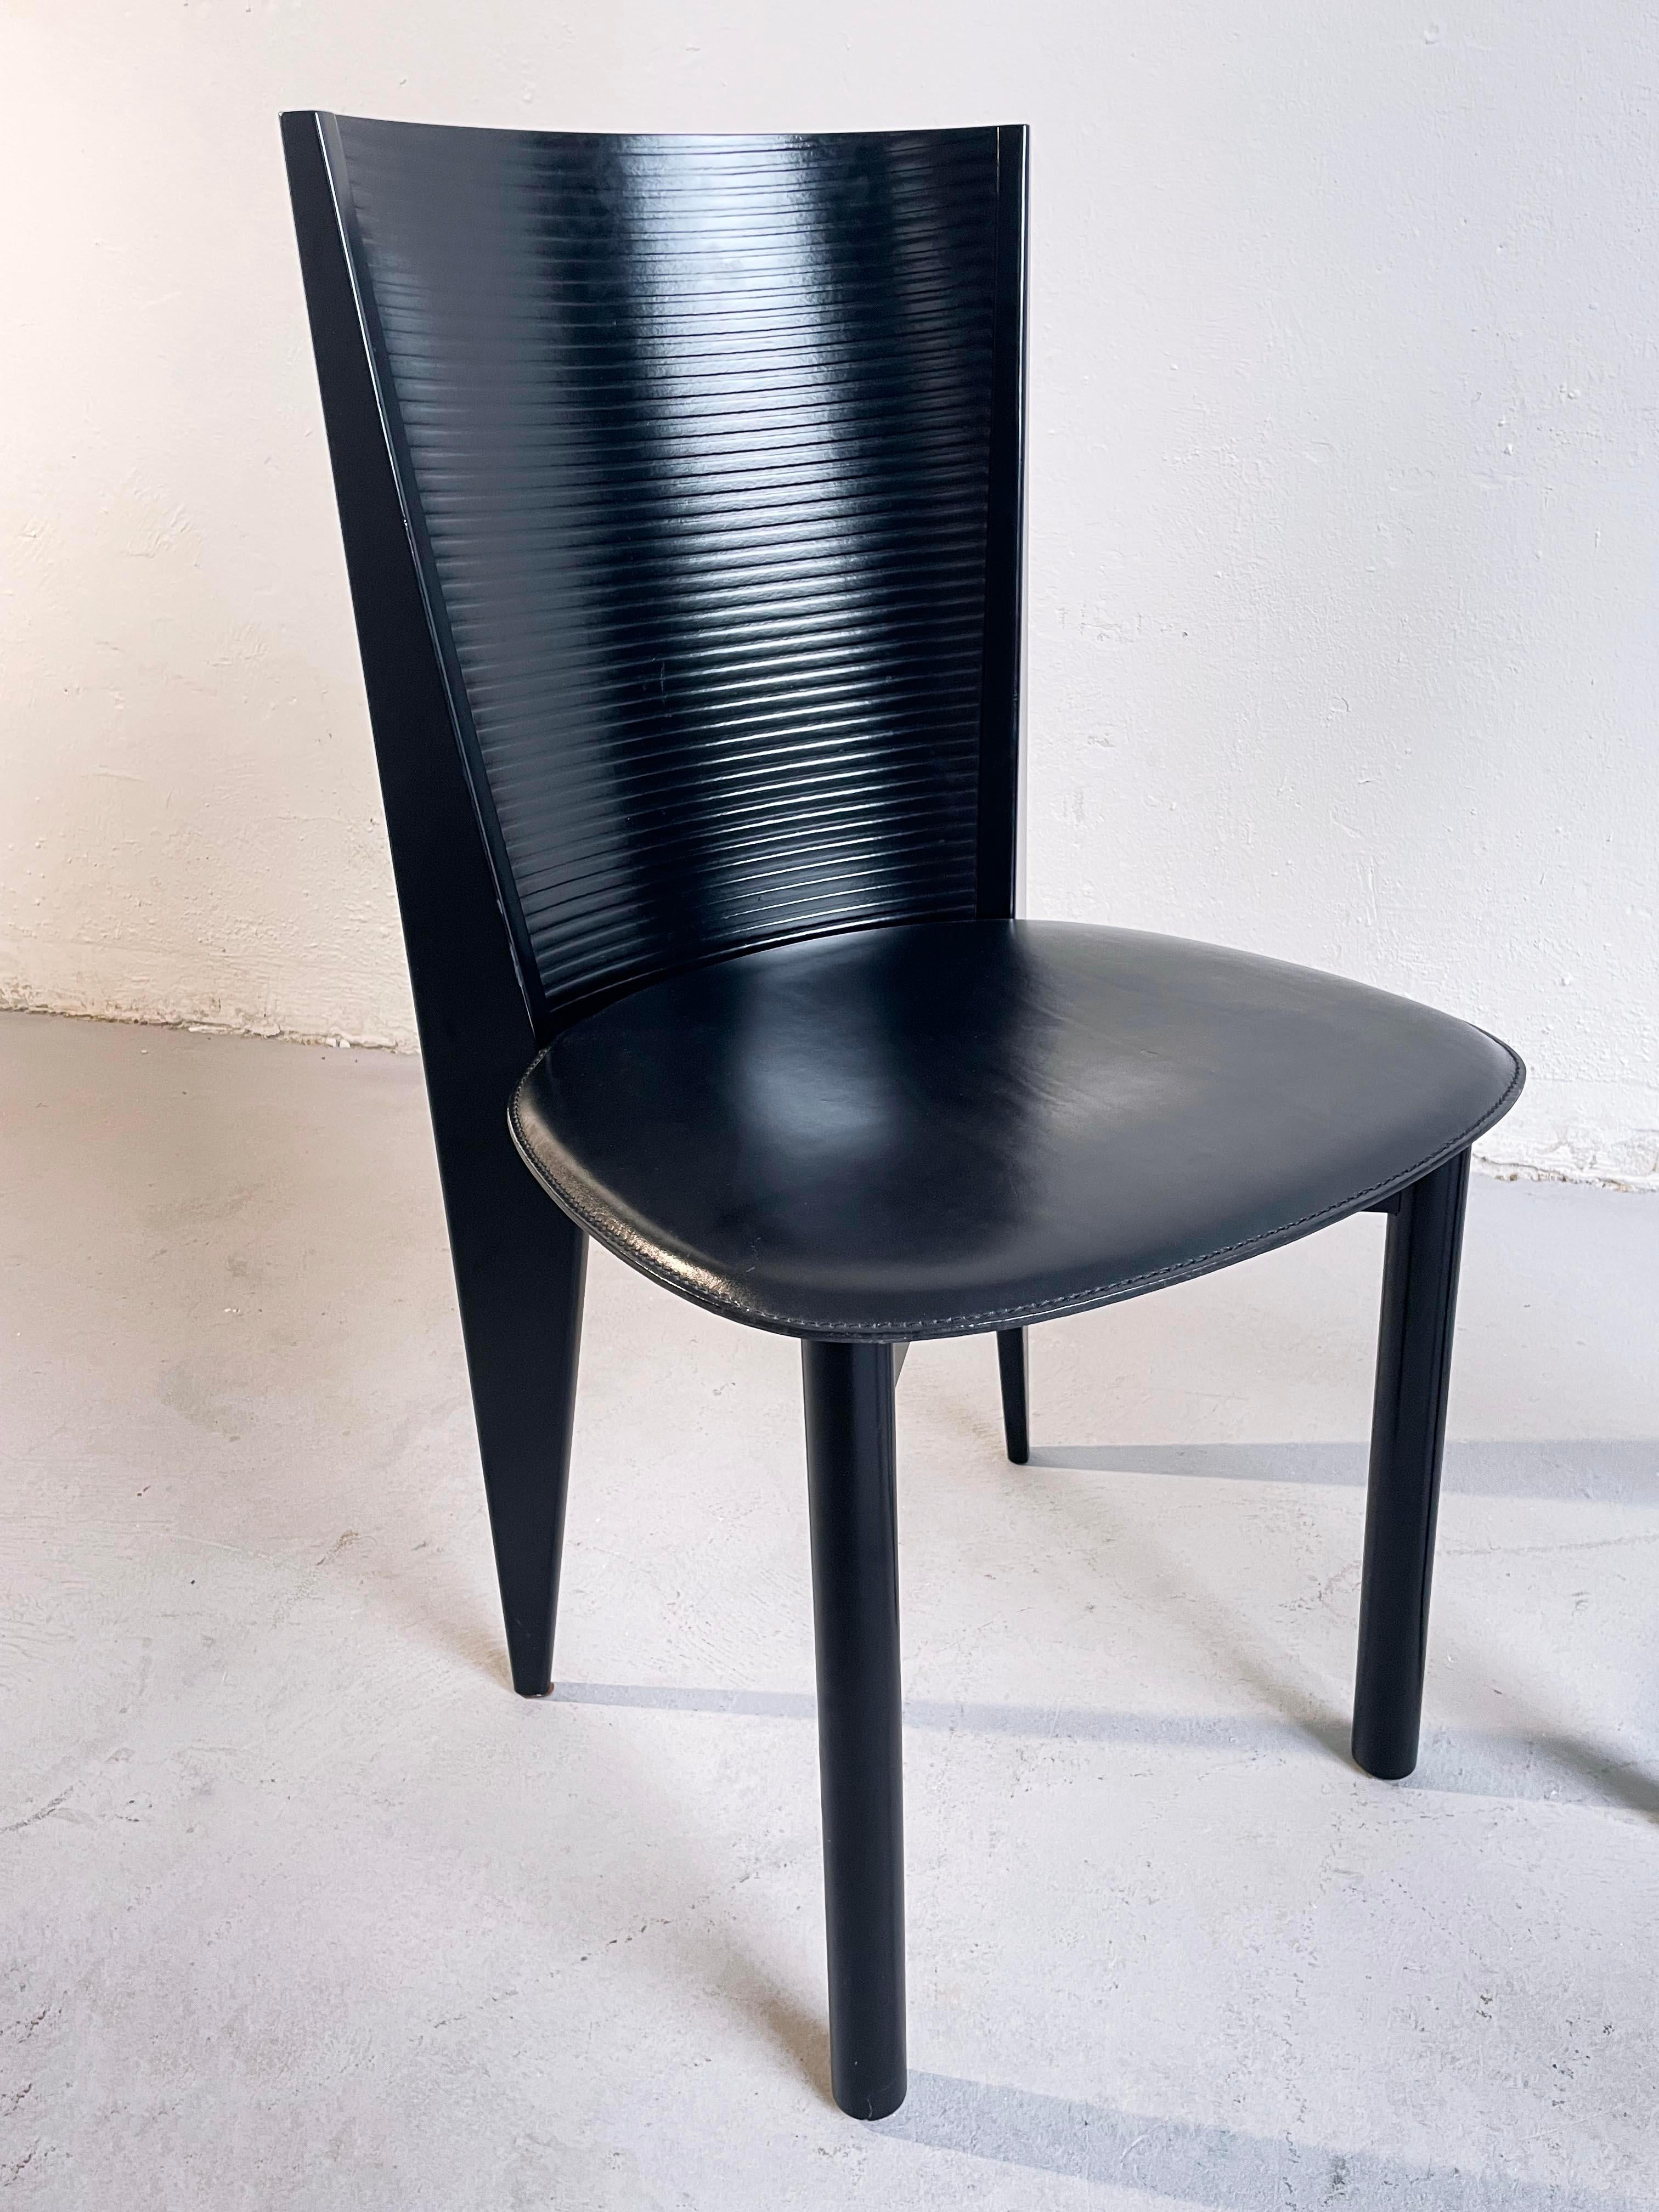 Pair of Italian Postmodern Black Wood and Leather Chairs by Calligaris, 1980s 6